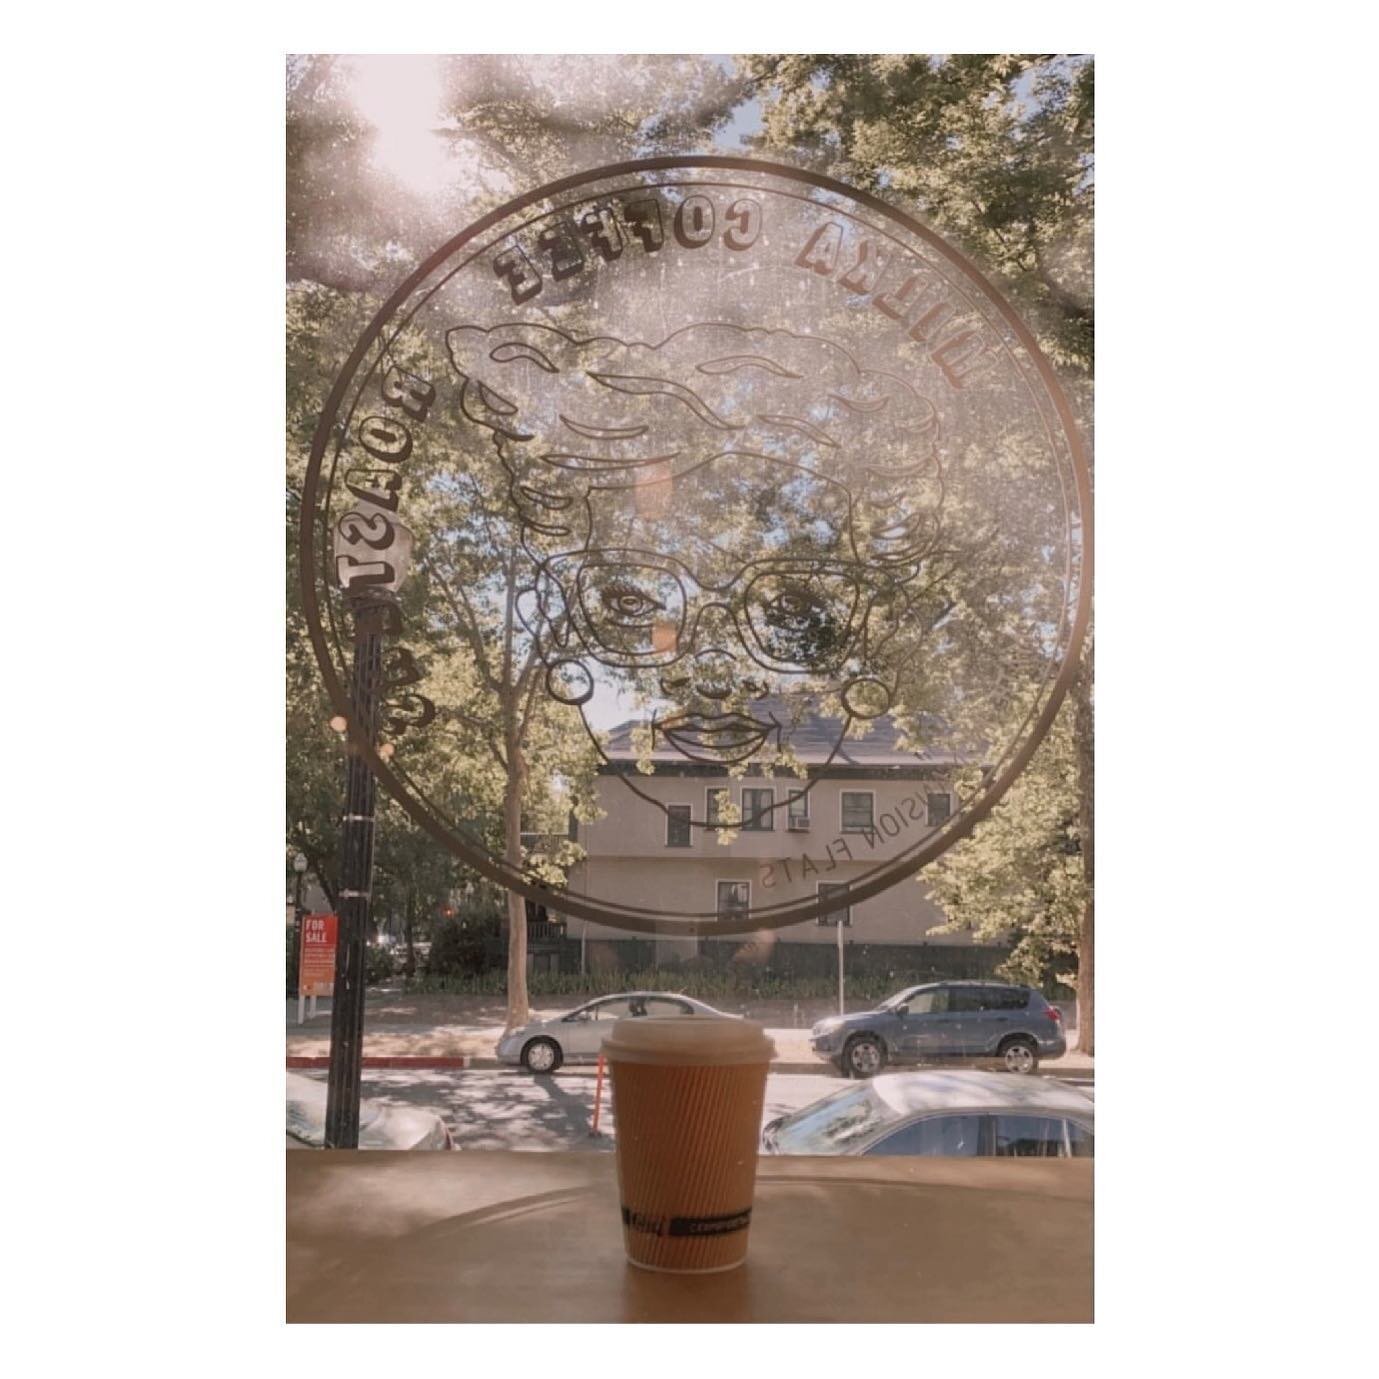 ✨ Best View in the House ✨ With indoor seating back we&rsquo;re seeing a lot of cool snaps from guests like @brigitho so come through and take one of your own!! Maybe we&rsquo;ll even feature it here 😉

📷 @brigitho 

#milkacoffee #midtownsac #mansi